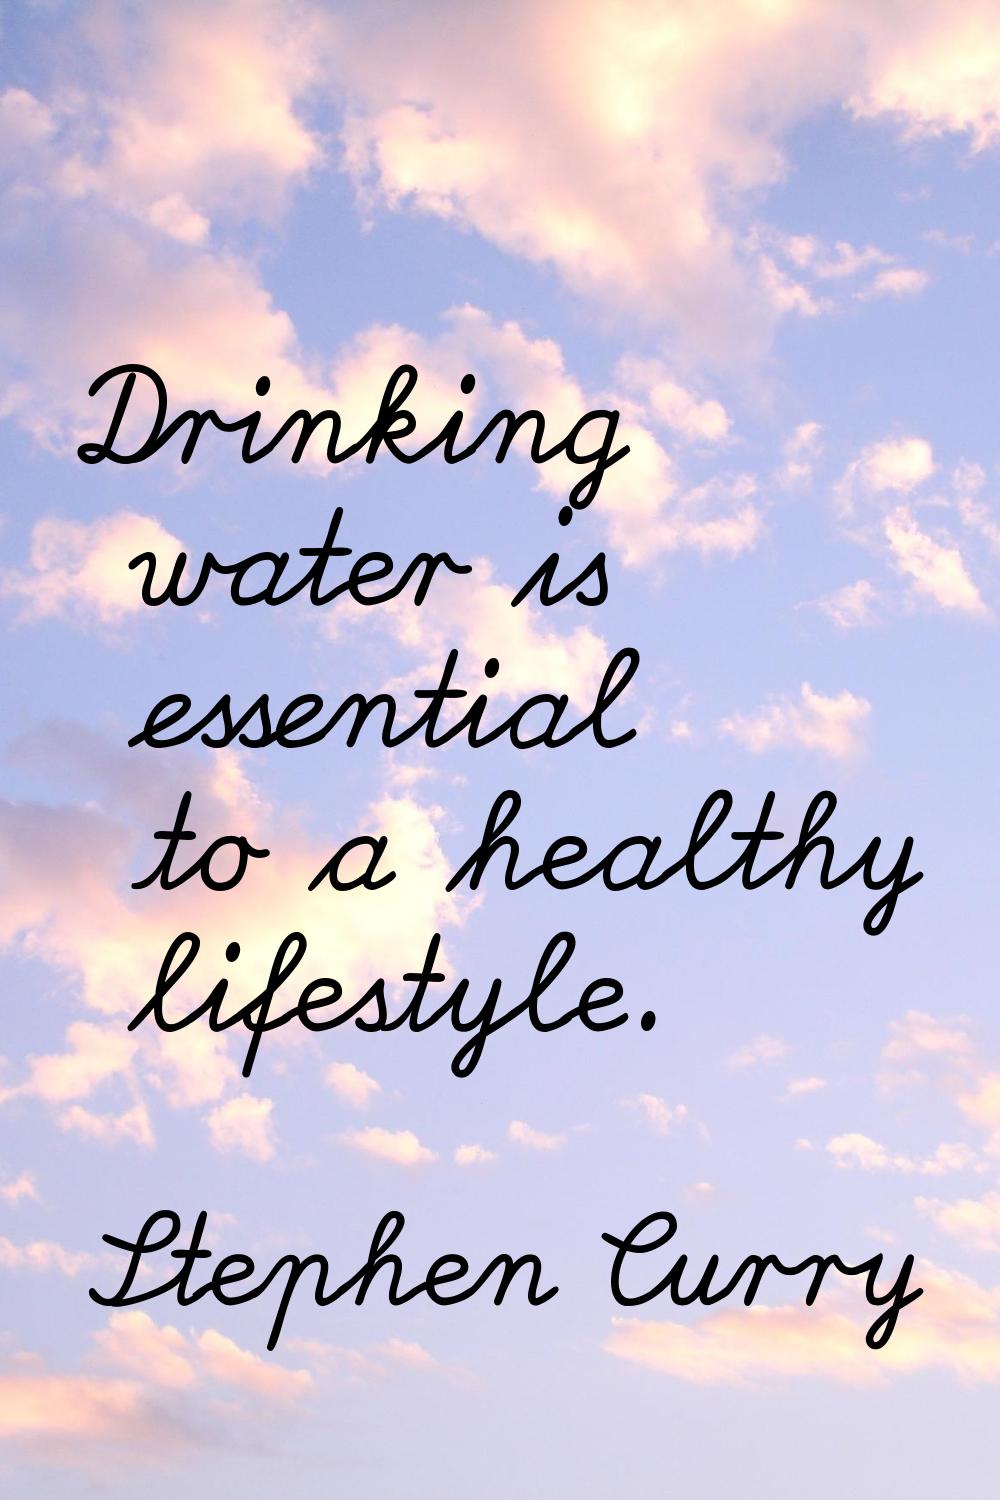 Drinking water is essential to a healthy lifestyle.